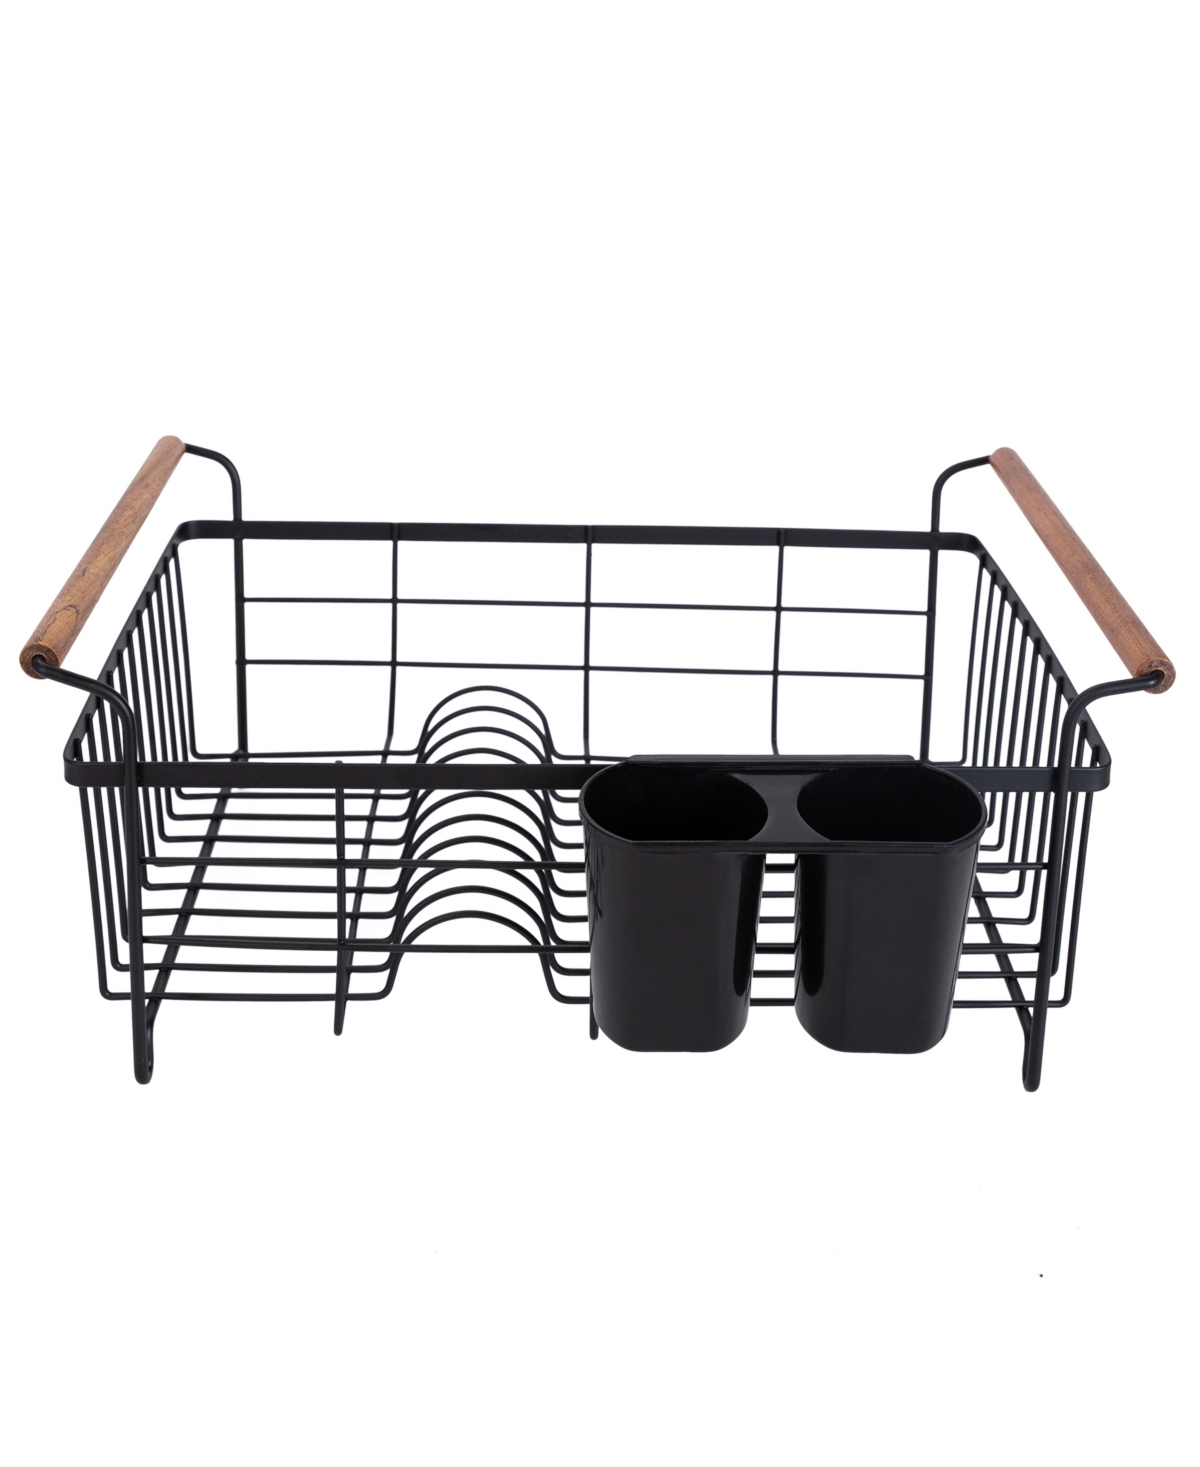 Acacia Wood Drying Rack with Draining Tray in Black - Black